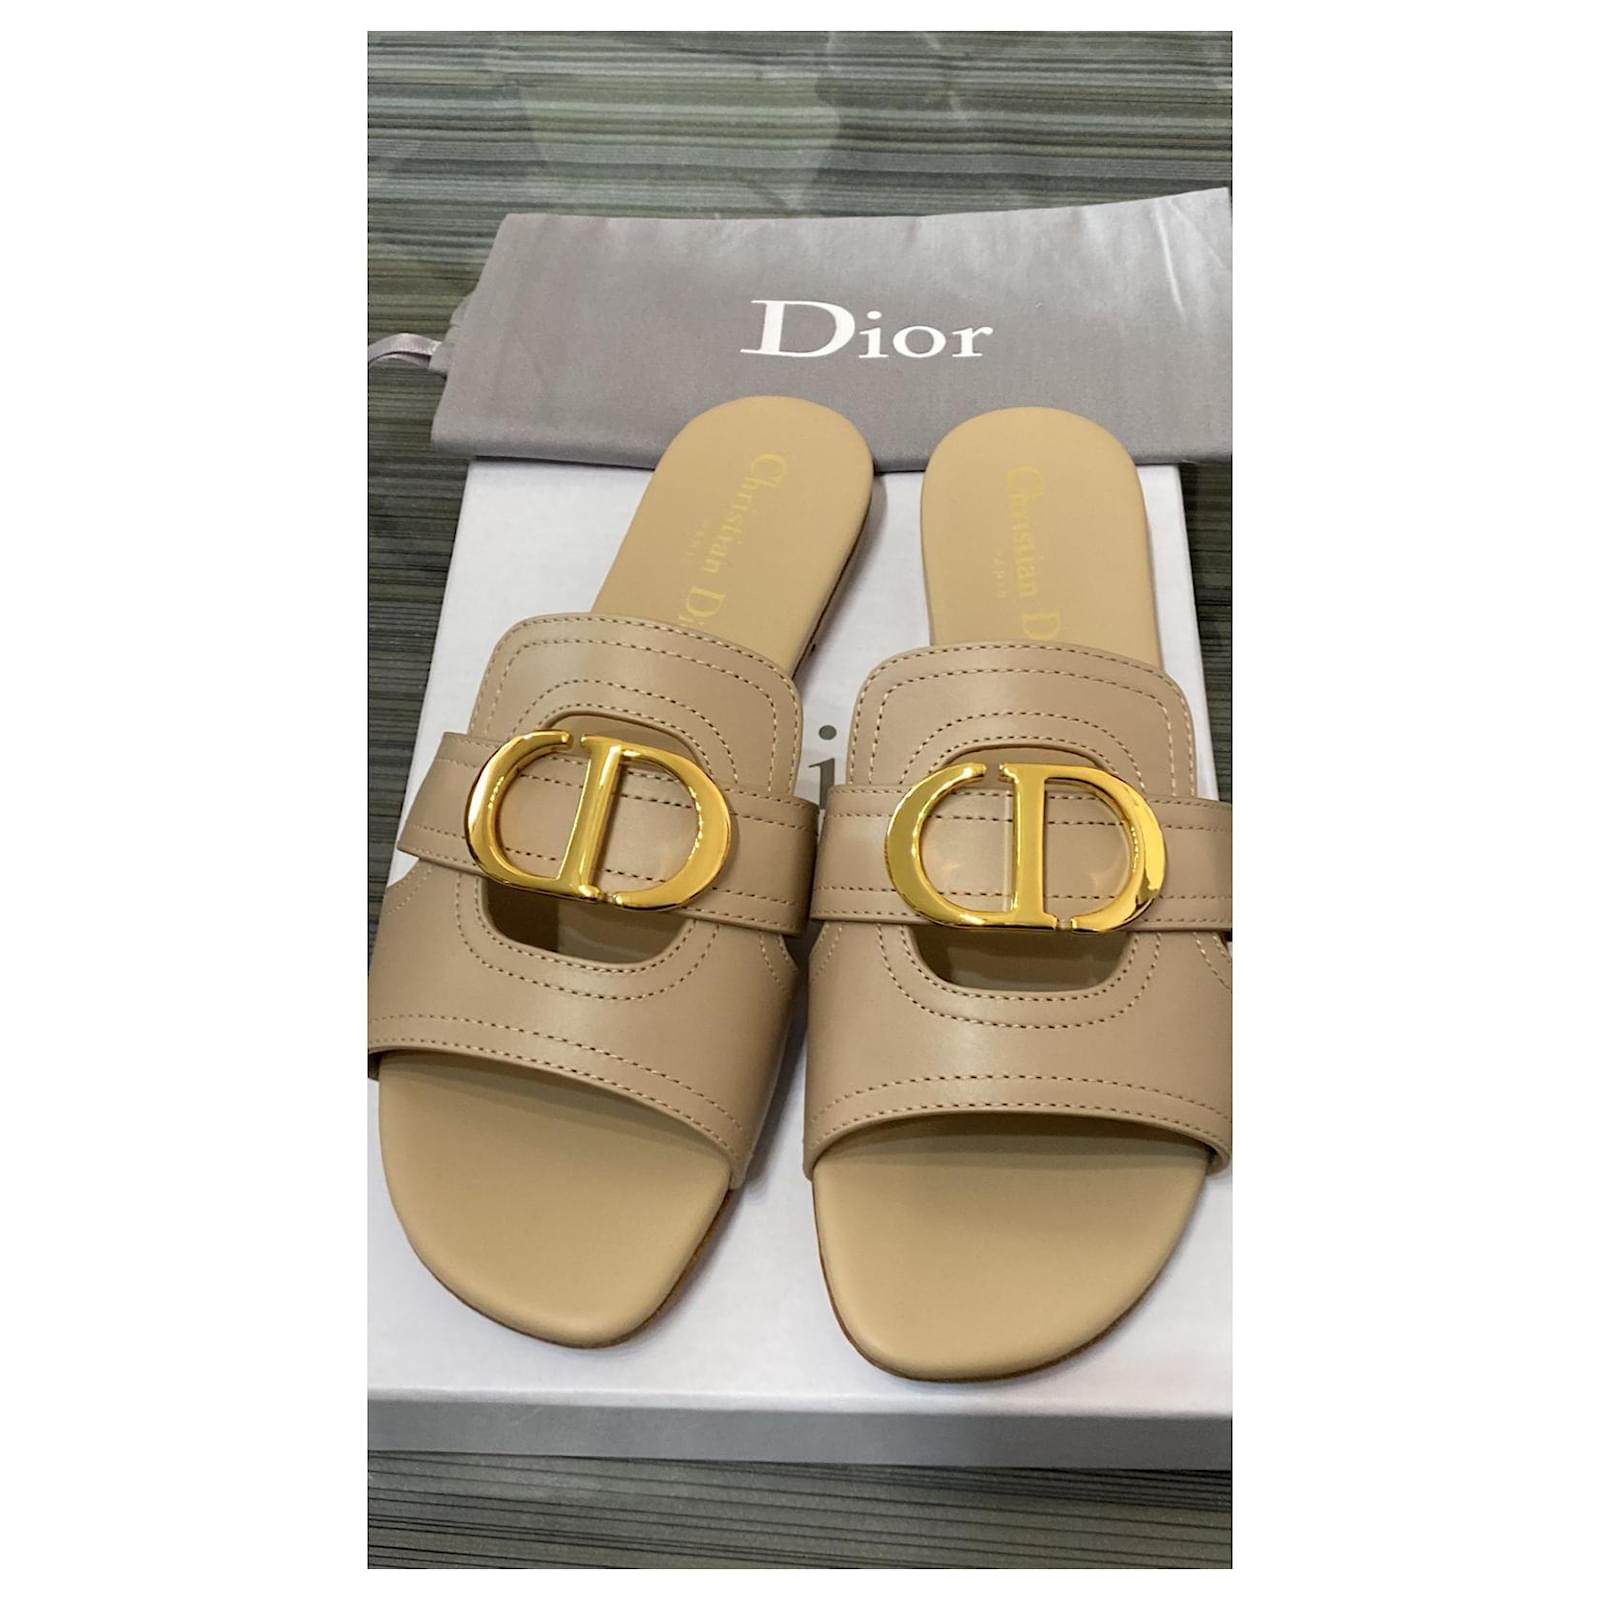 Dior - Authenticated 30 Montaigne Sandal - Leather White Plain for Women, Very Good Condition